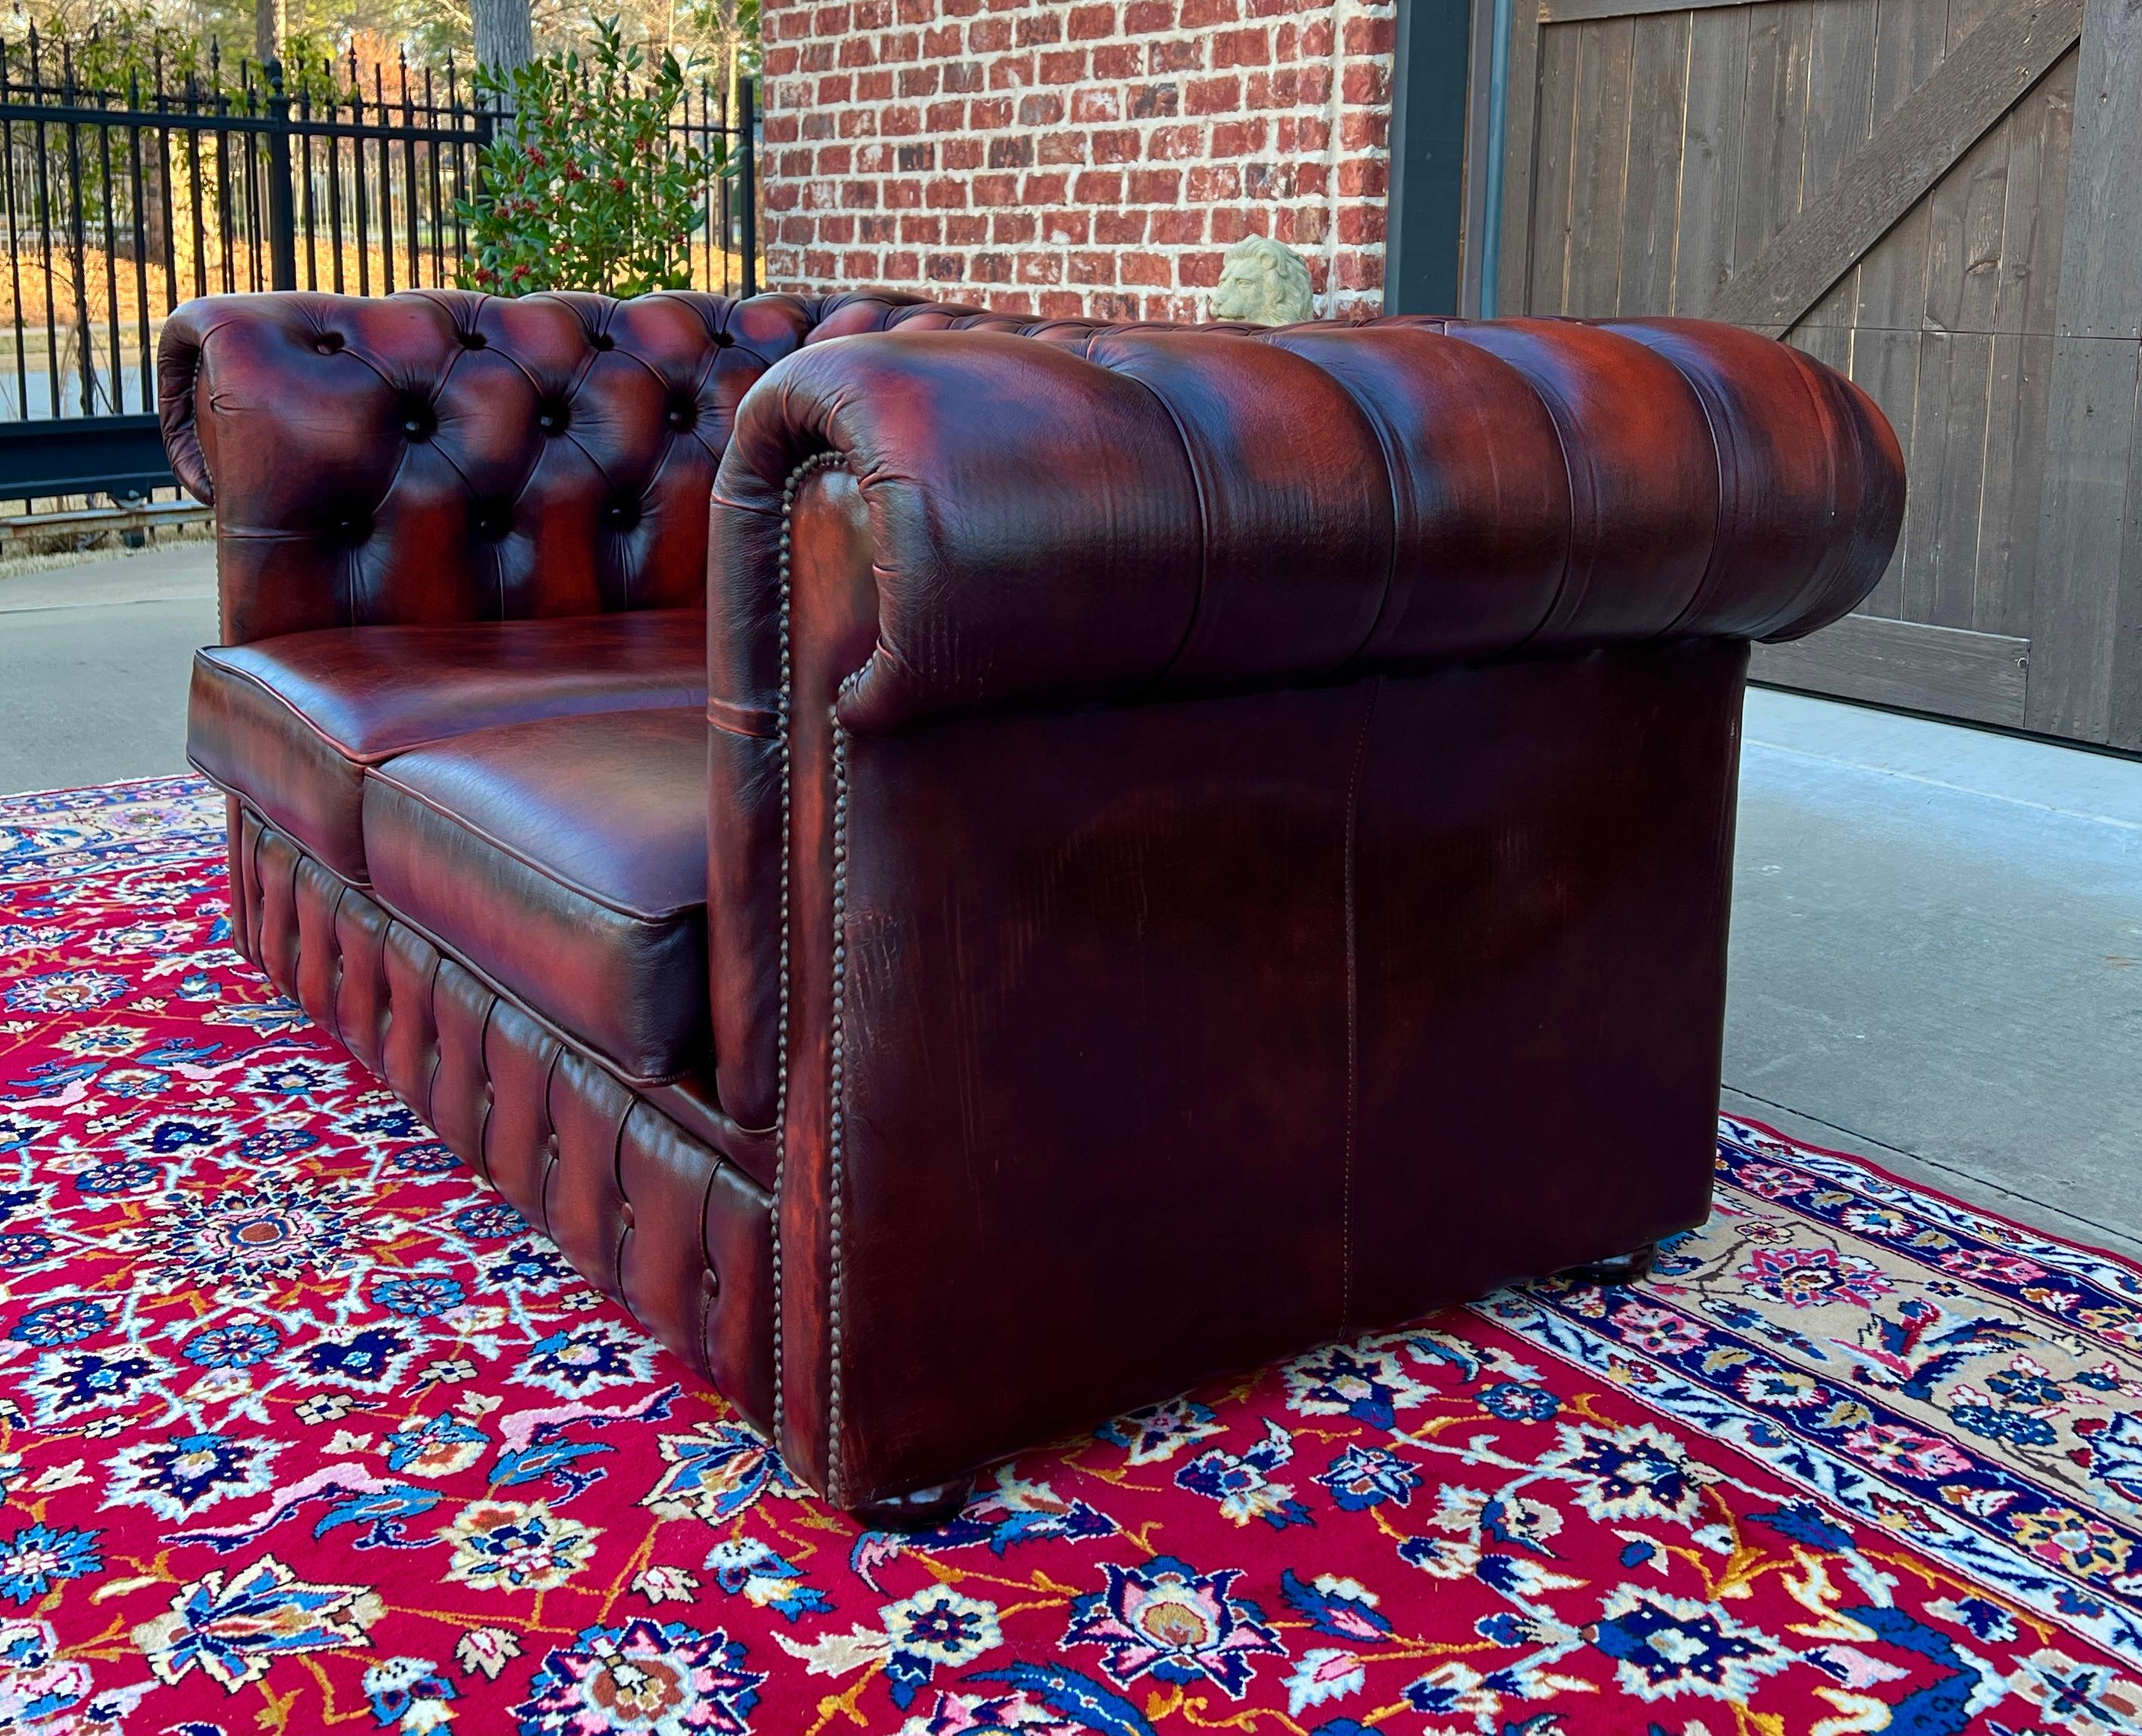 Vintage English Chesterfield Leather Tufted Love Seat Sofa Oxblood Red #2 For Sale 2